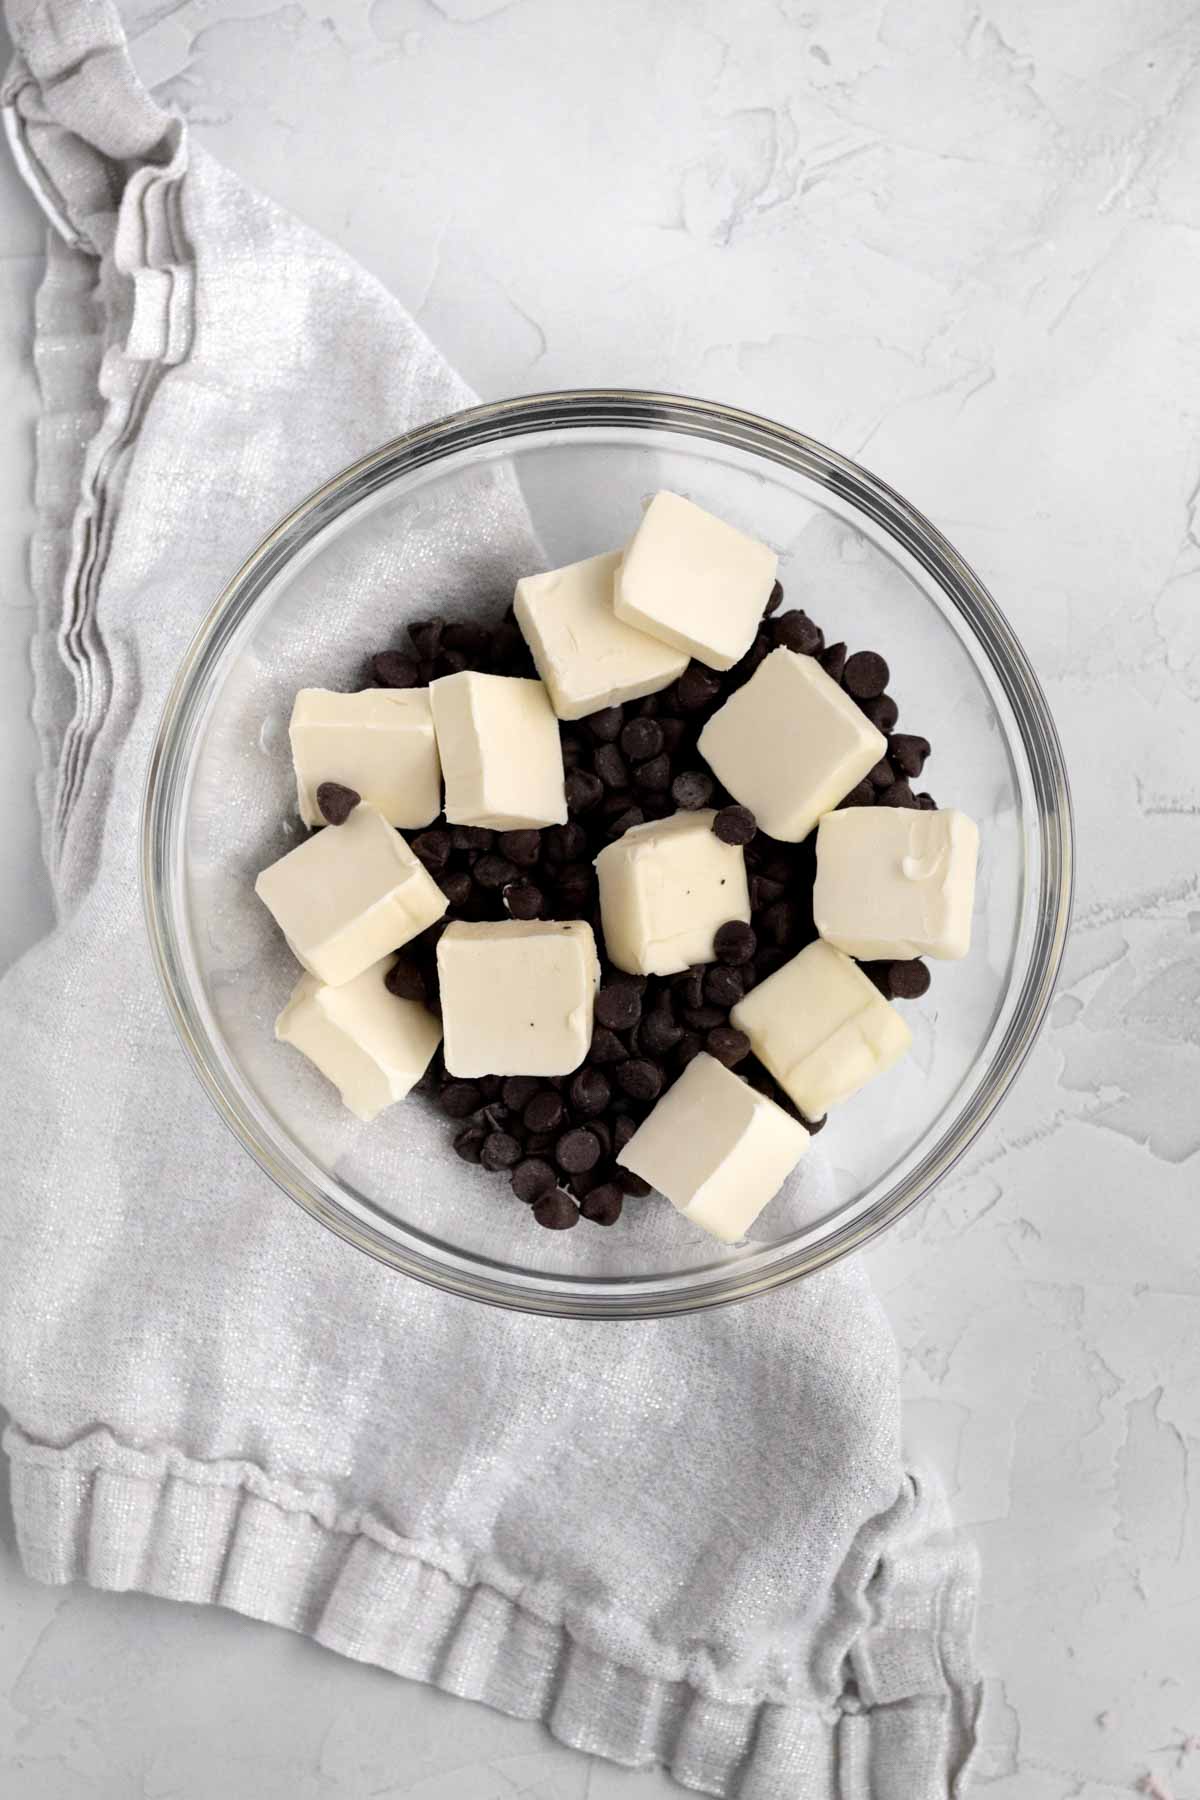 Slices of butter and chocolate chips in a glass bowl.